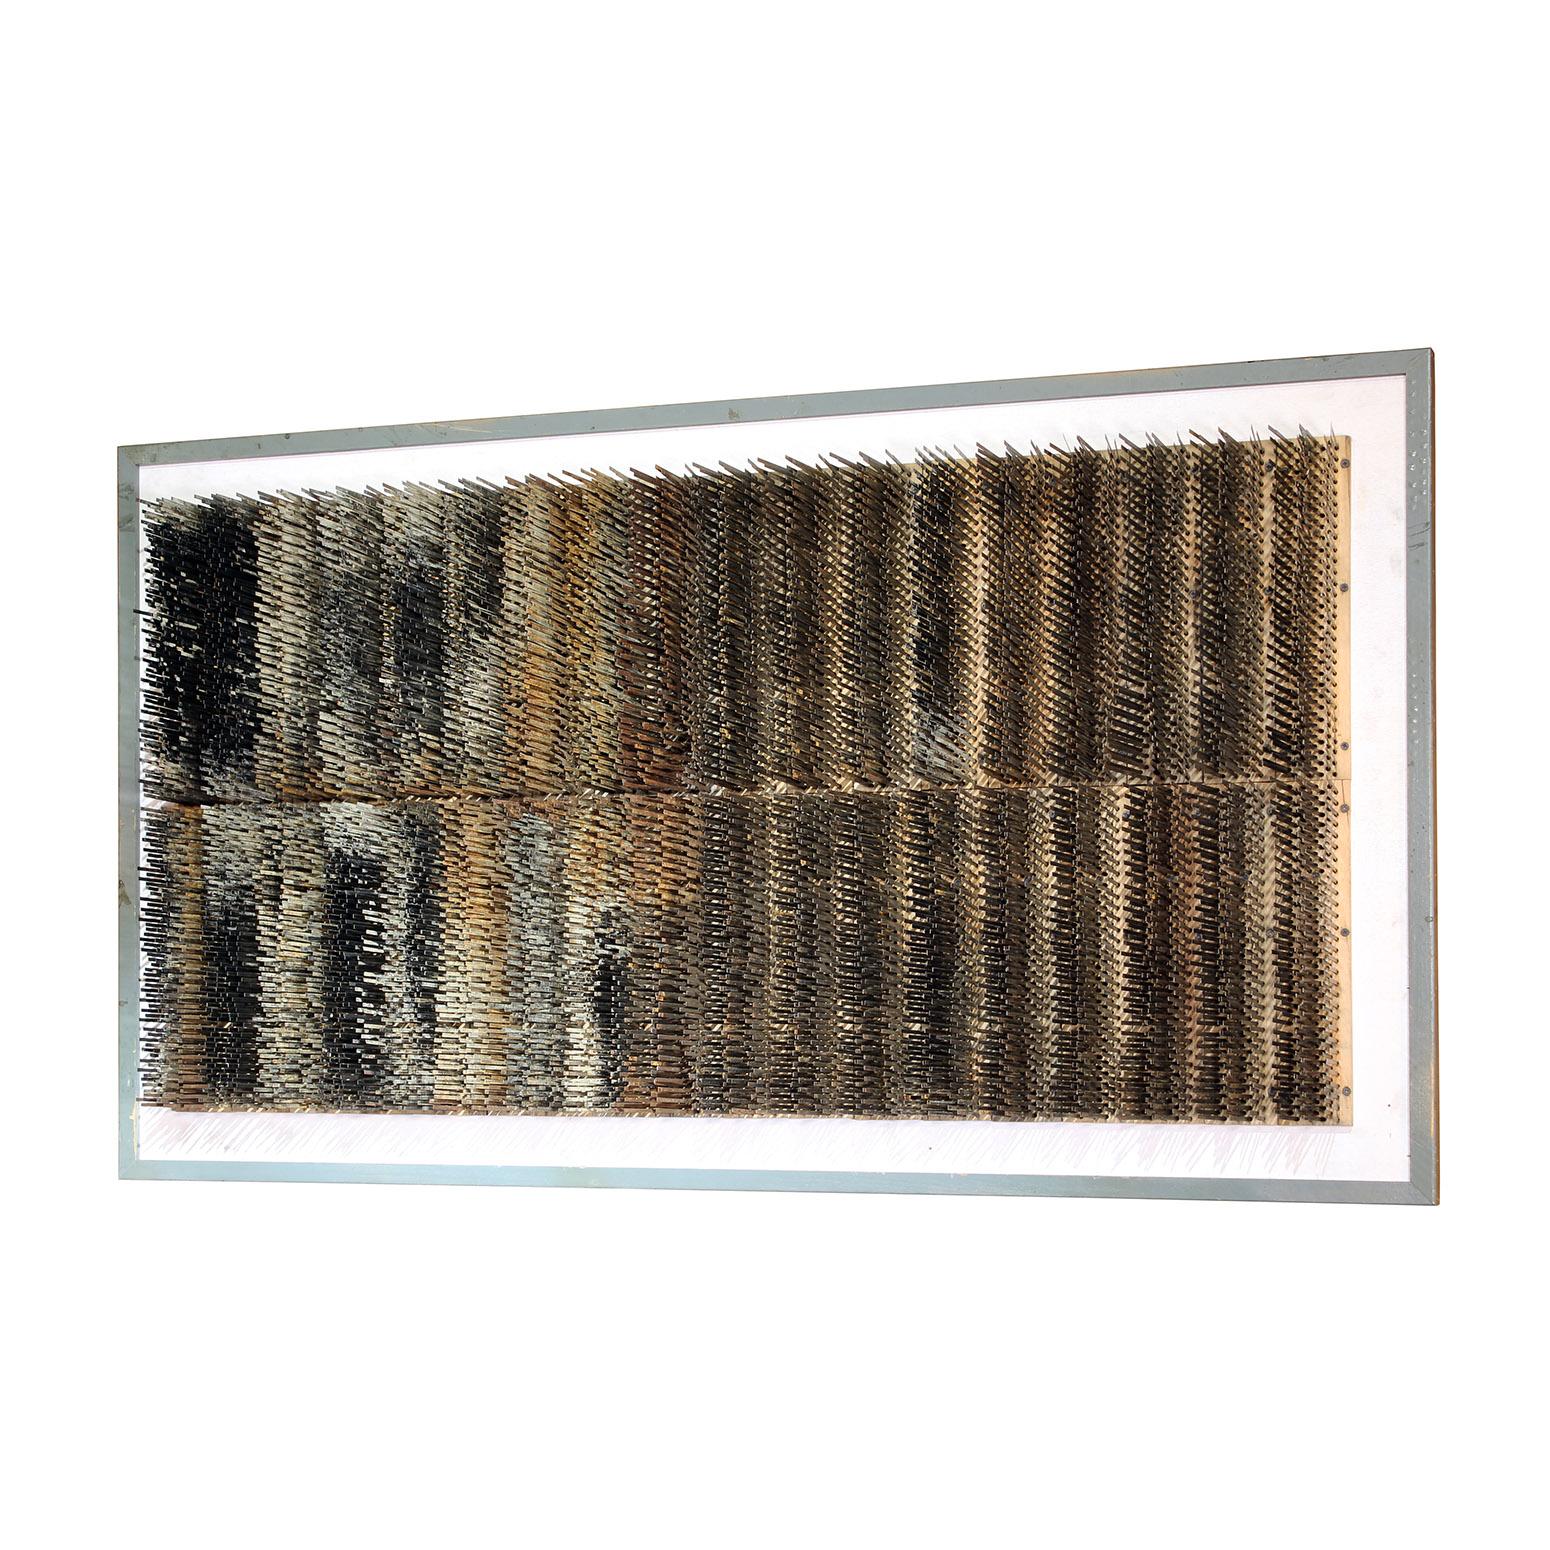 Industrial wall art sculpture. Turn of the century steel factory conveyor brushes on wooden frame. Measures: 64 1/4